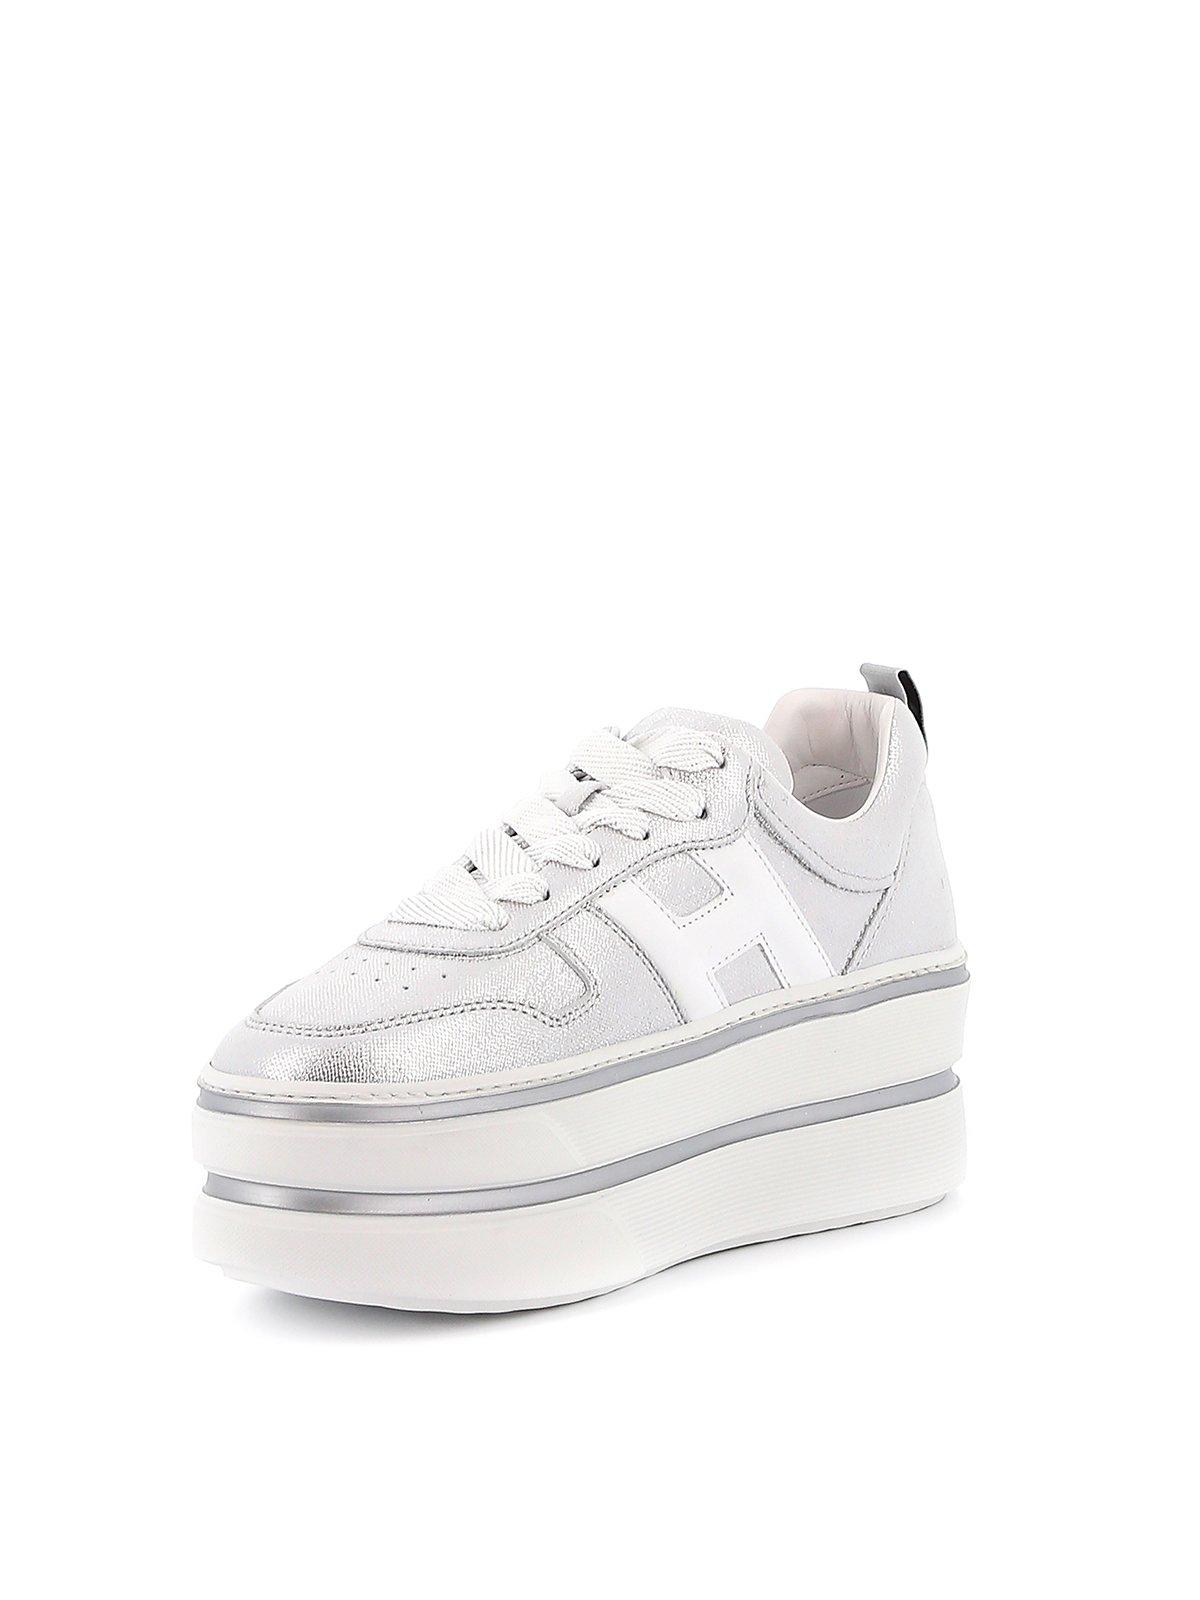 Hogan Leather Sneakers H449 Silver And White in Metallic - Lyst